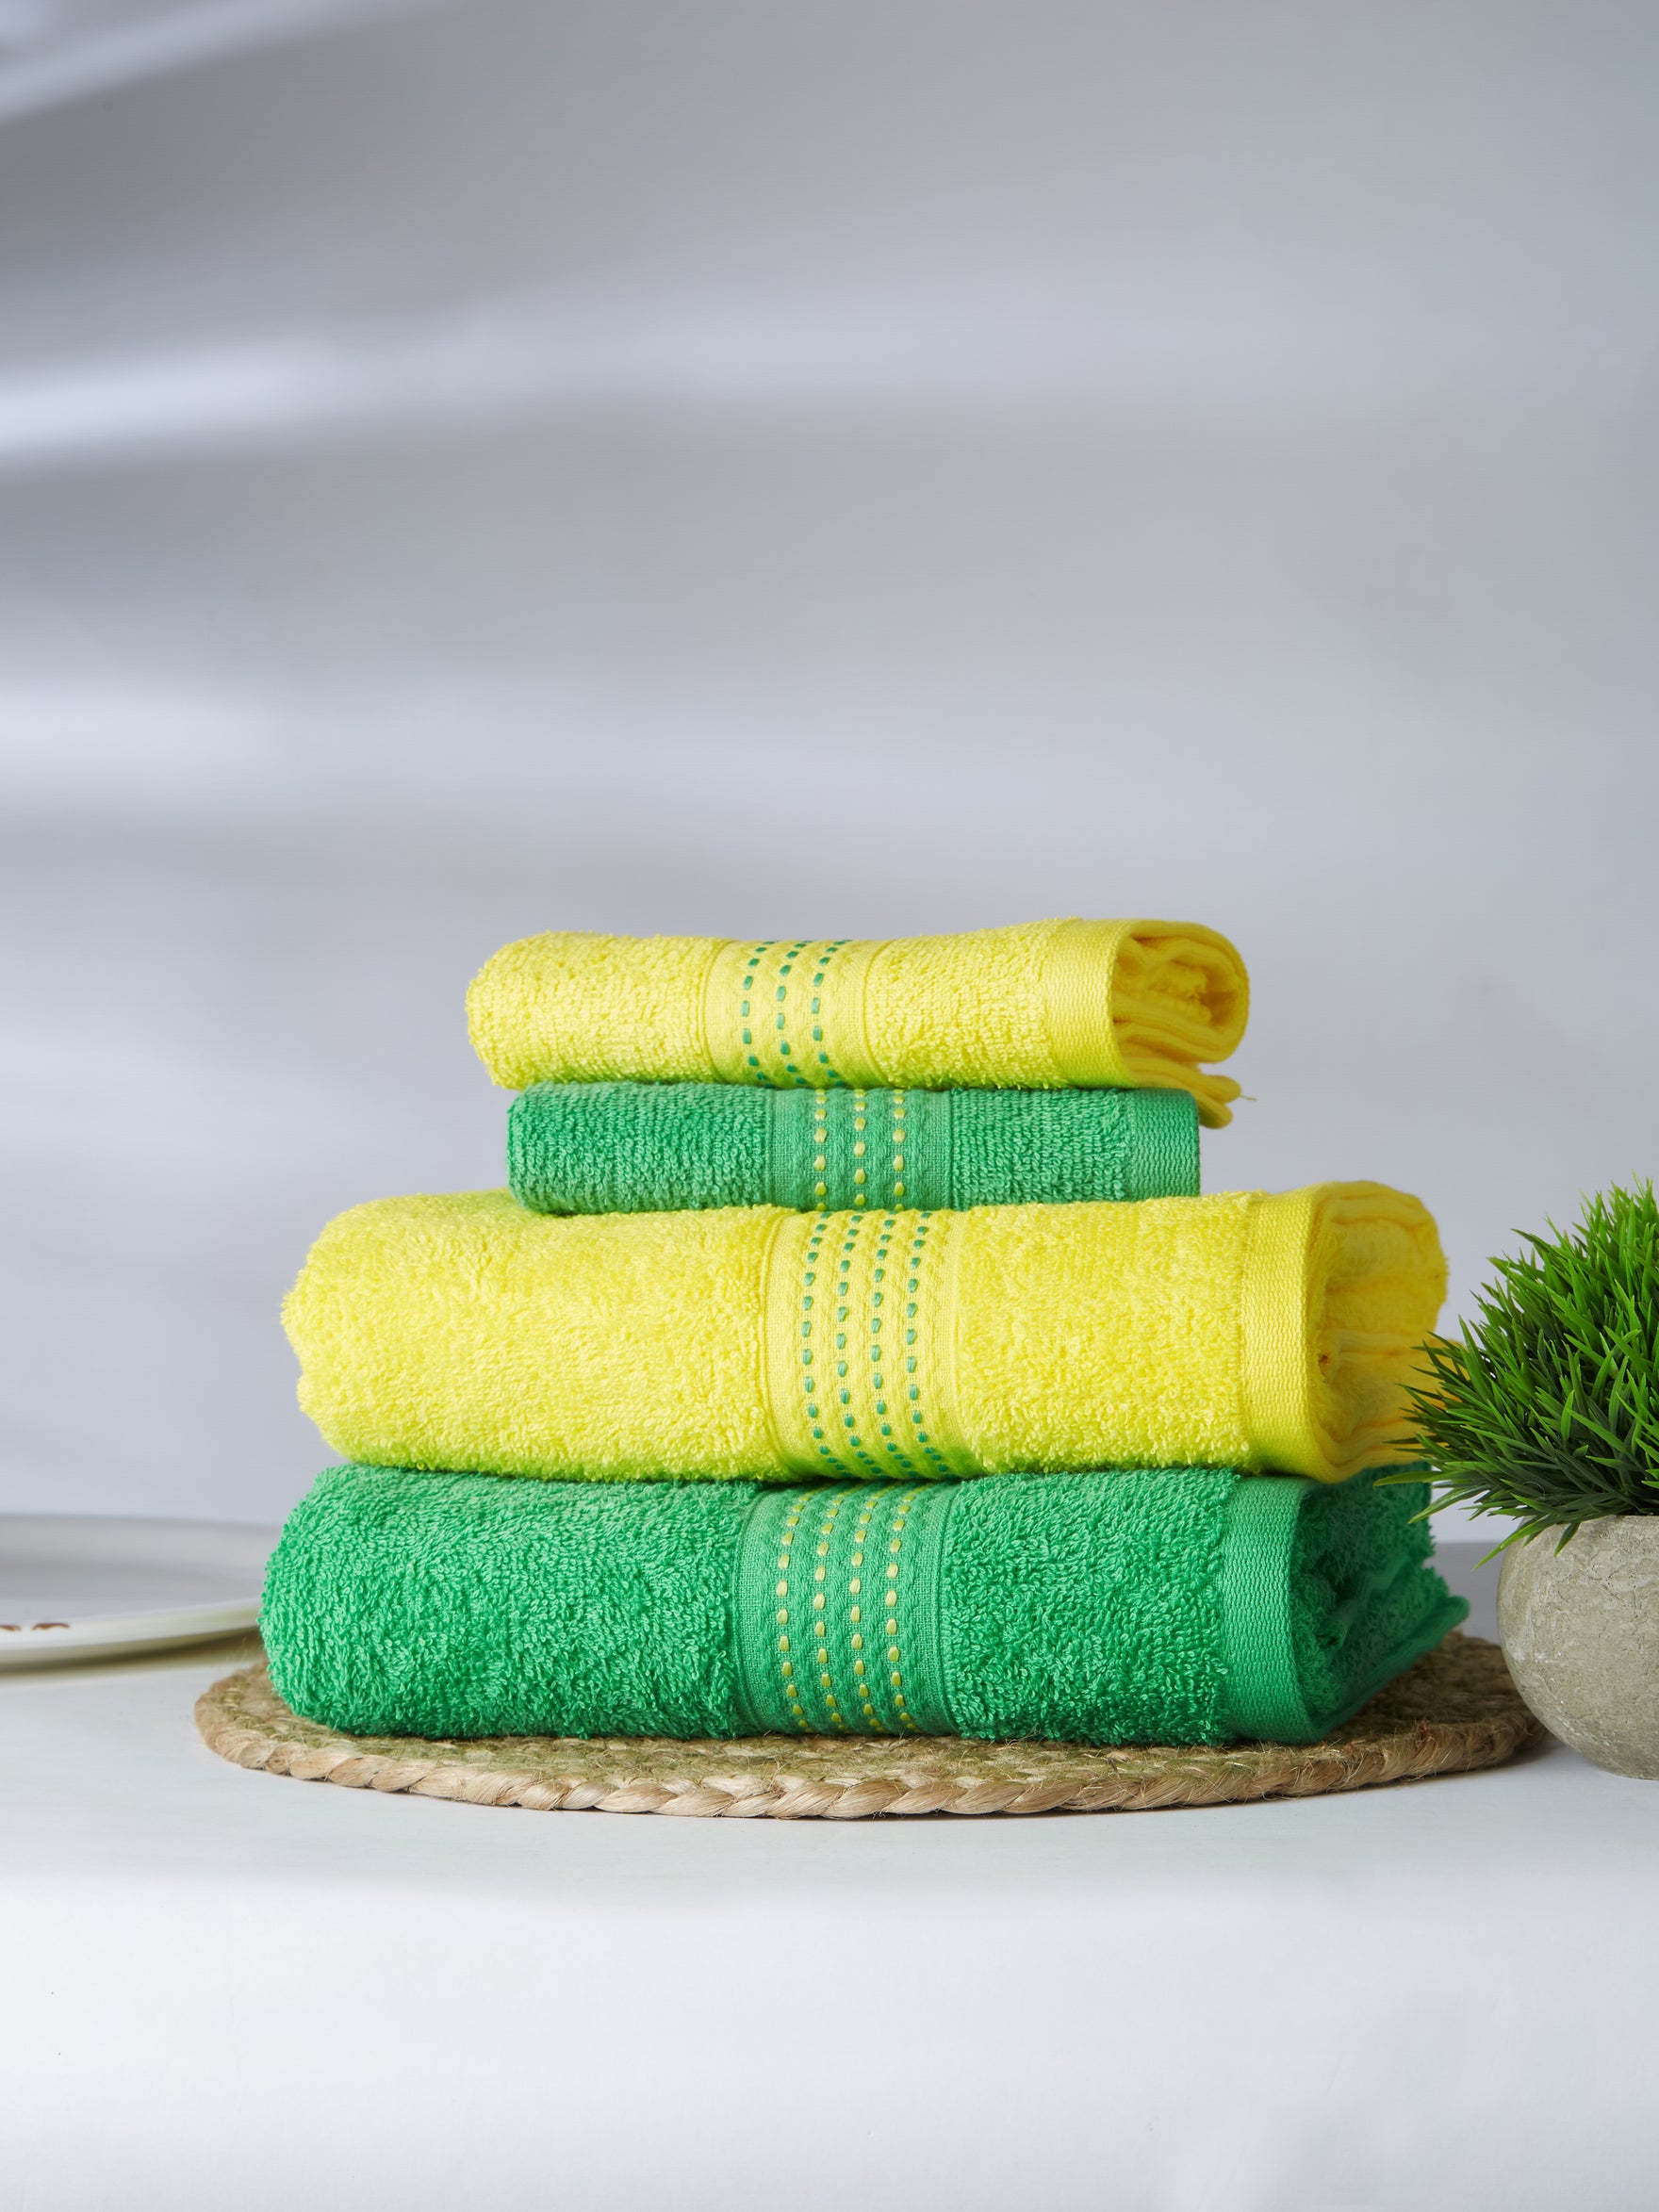 Most Absorbent Towels for Quick Drying and Maximum Comfort